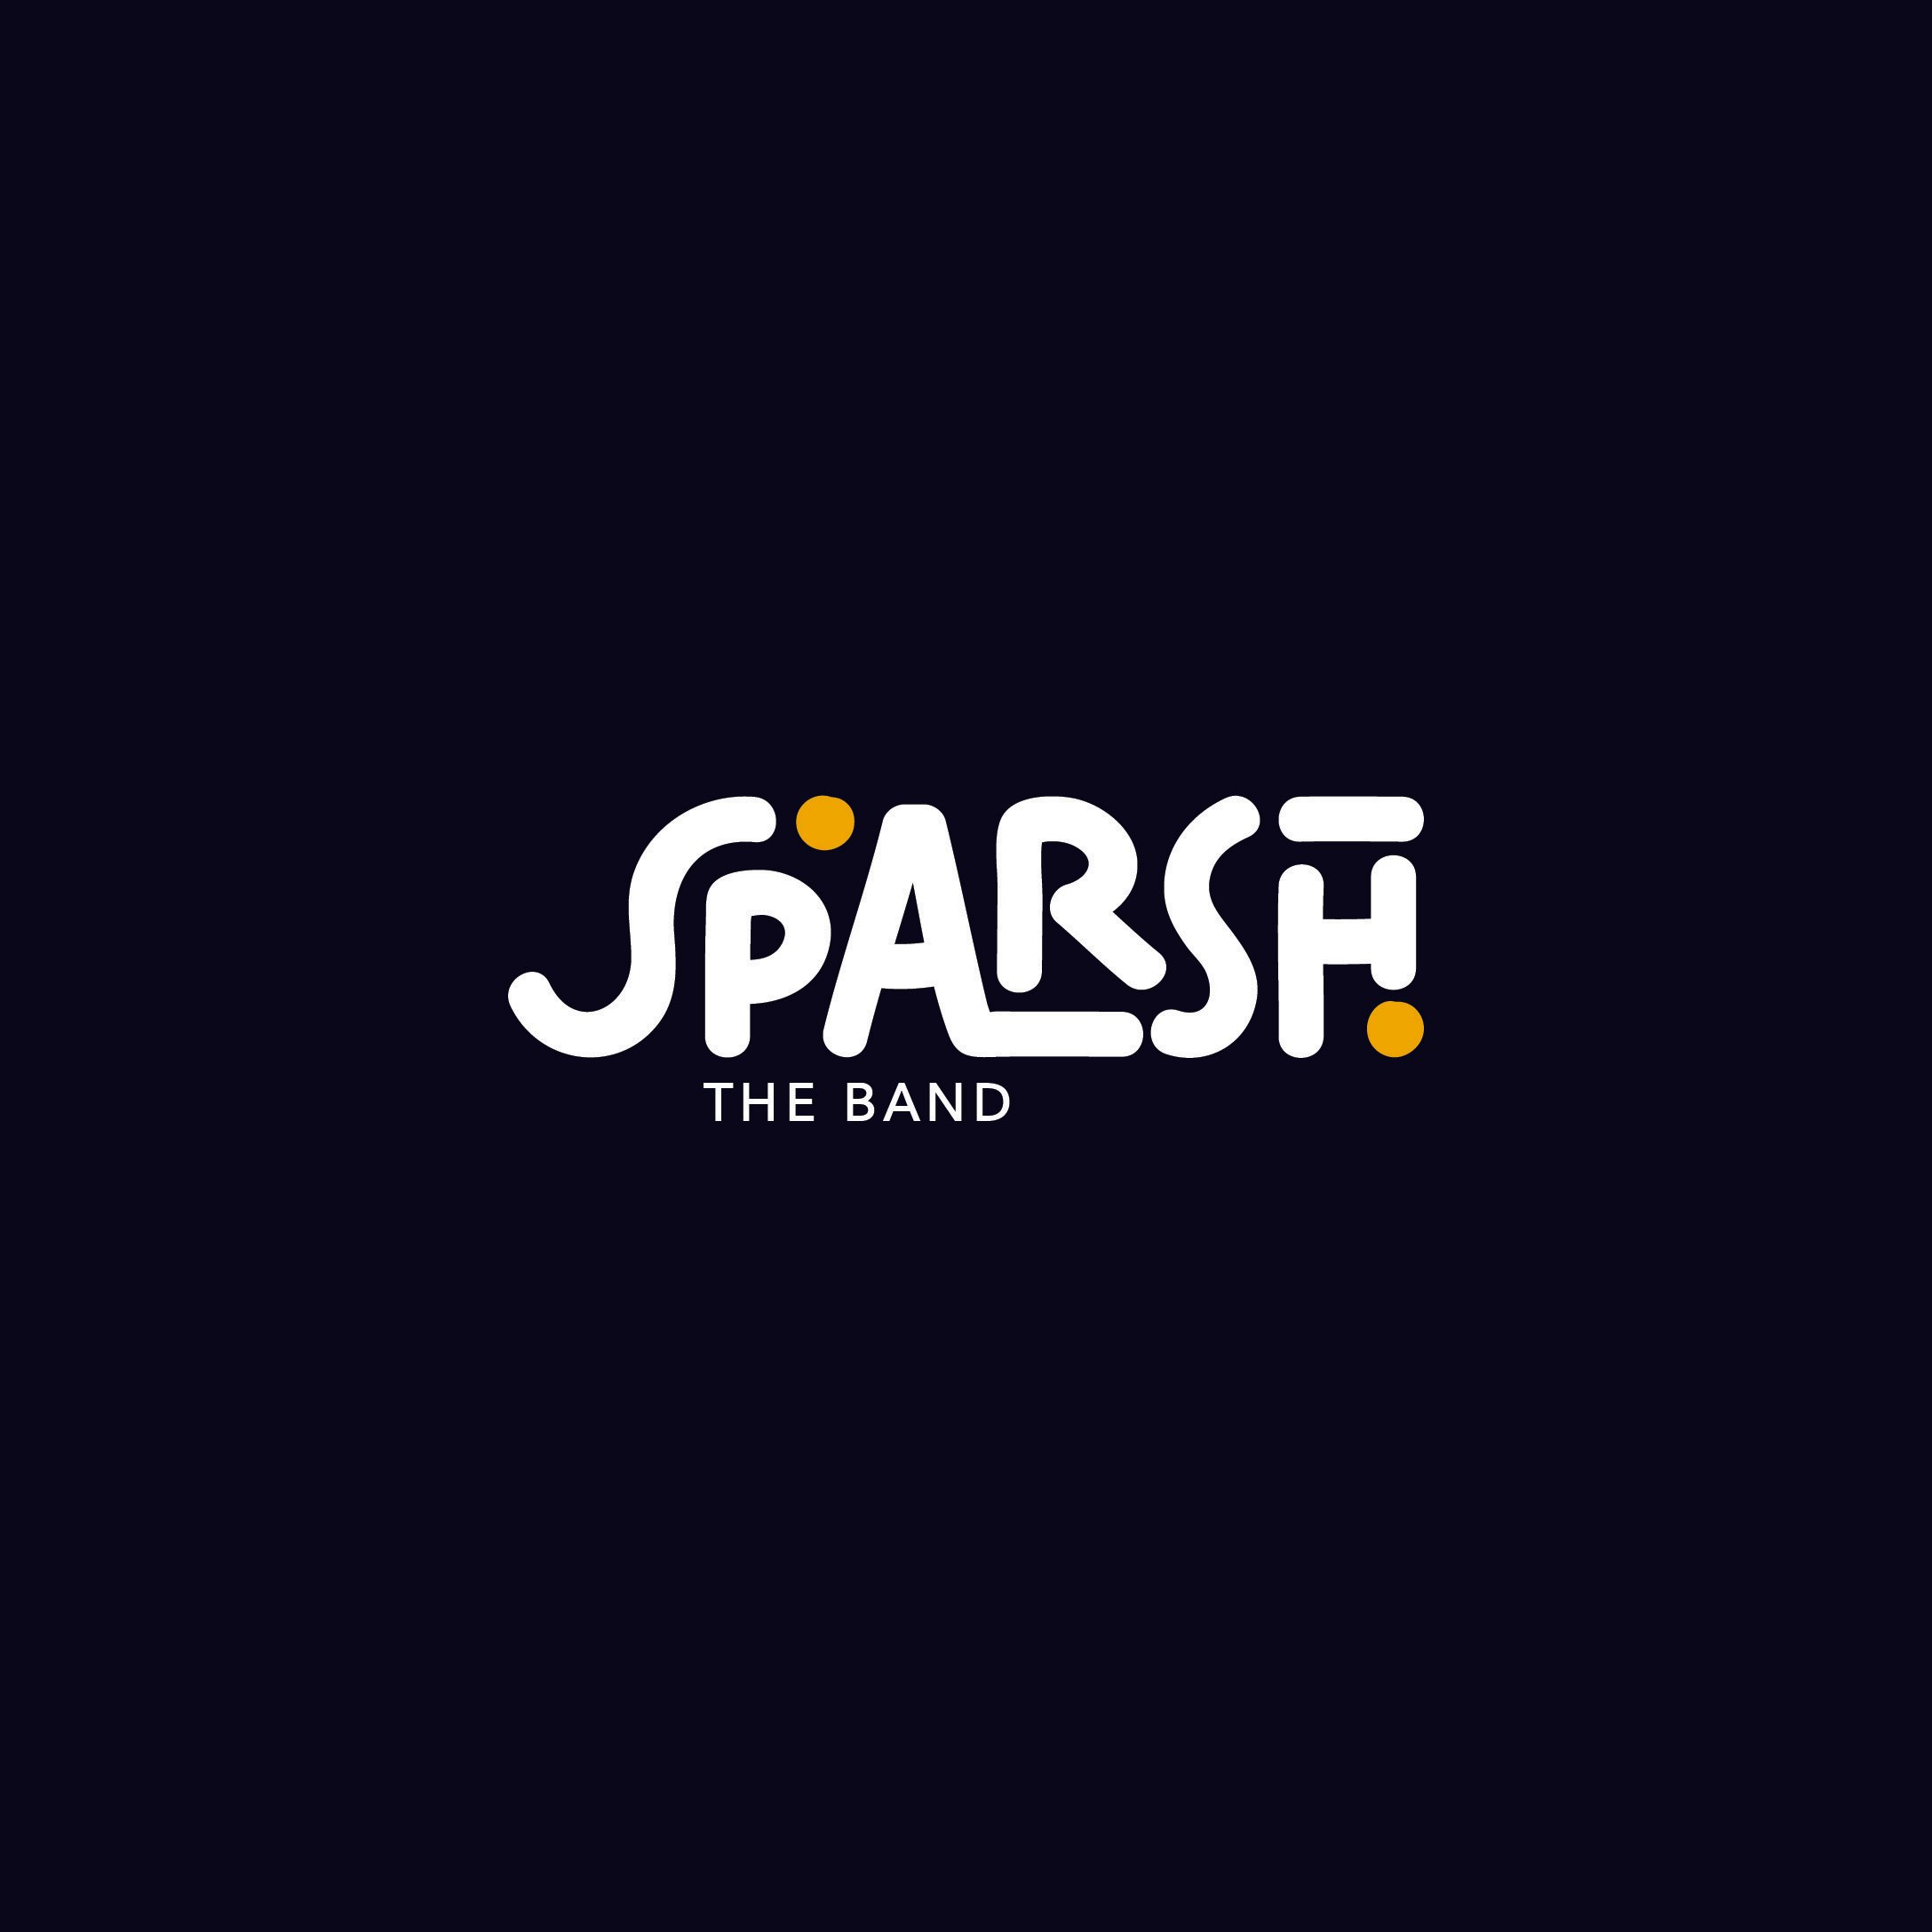 Sparsh Group – Home